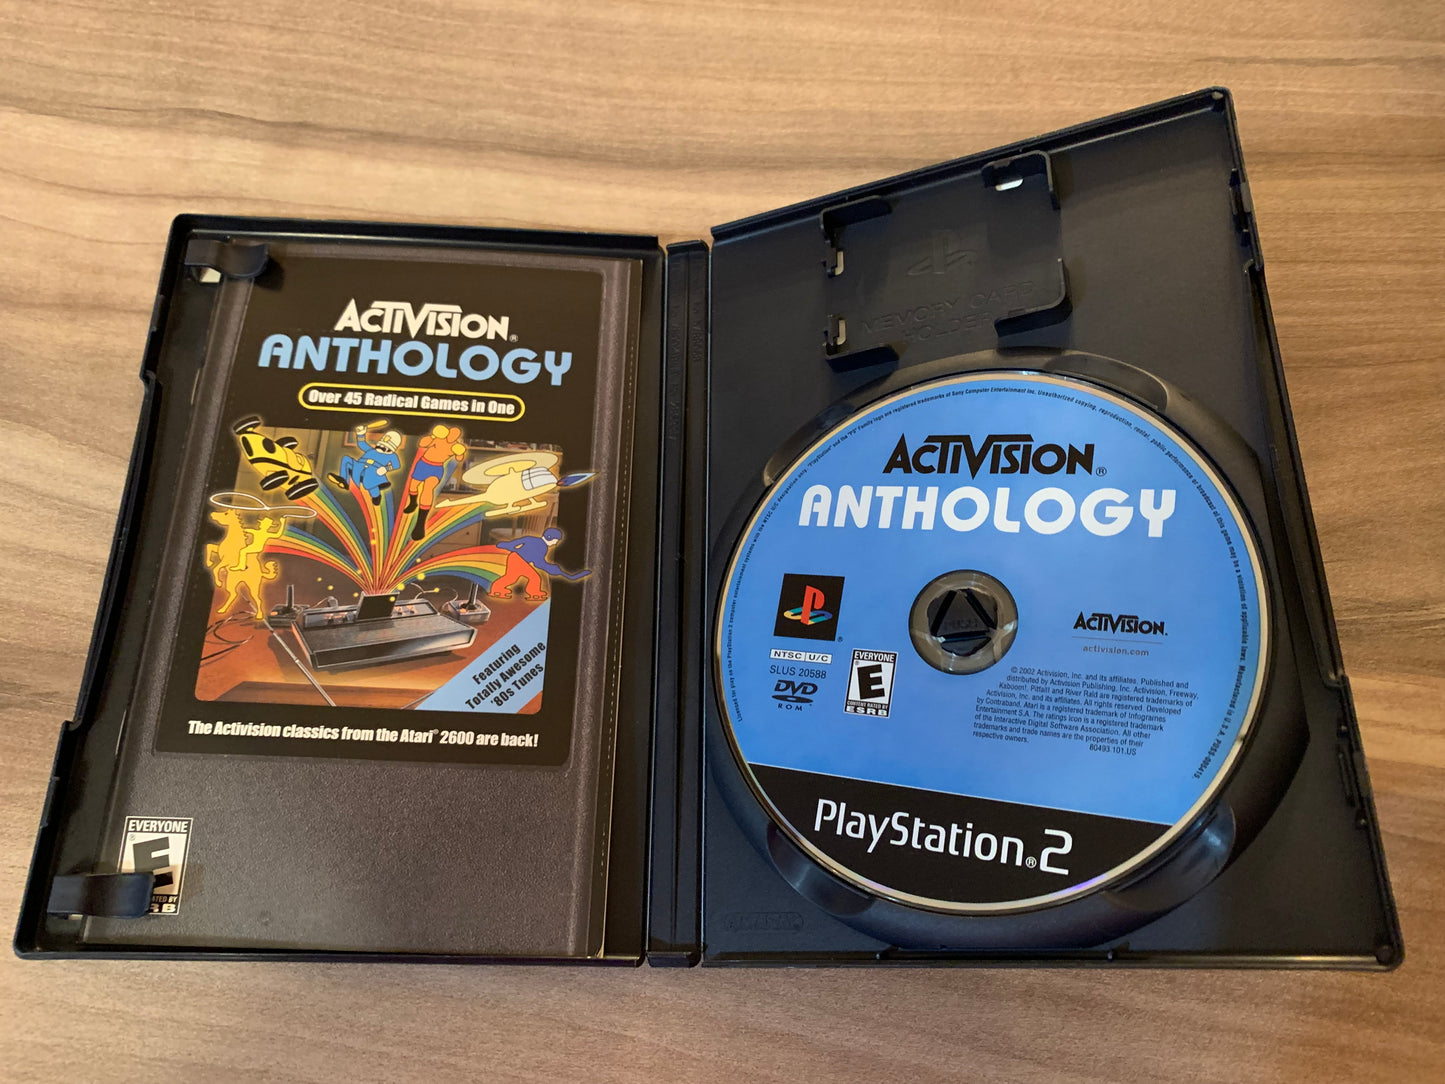 SONY PLAYSTATiON 2 [PS2] | ACTiViSiON ANTHOLOGY